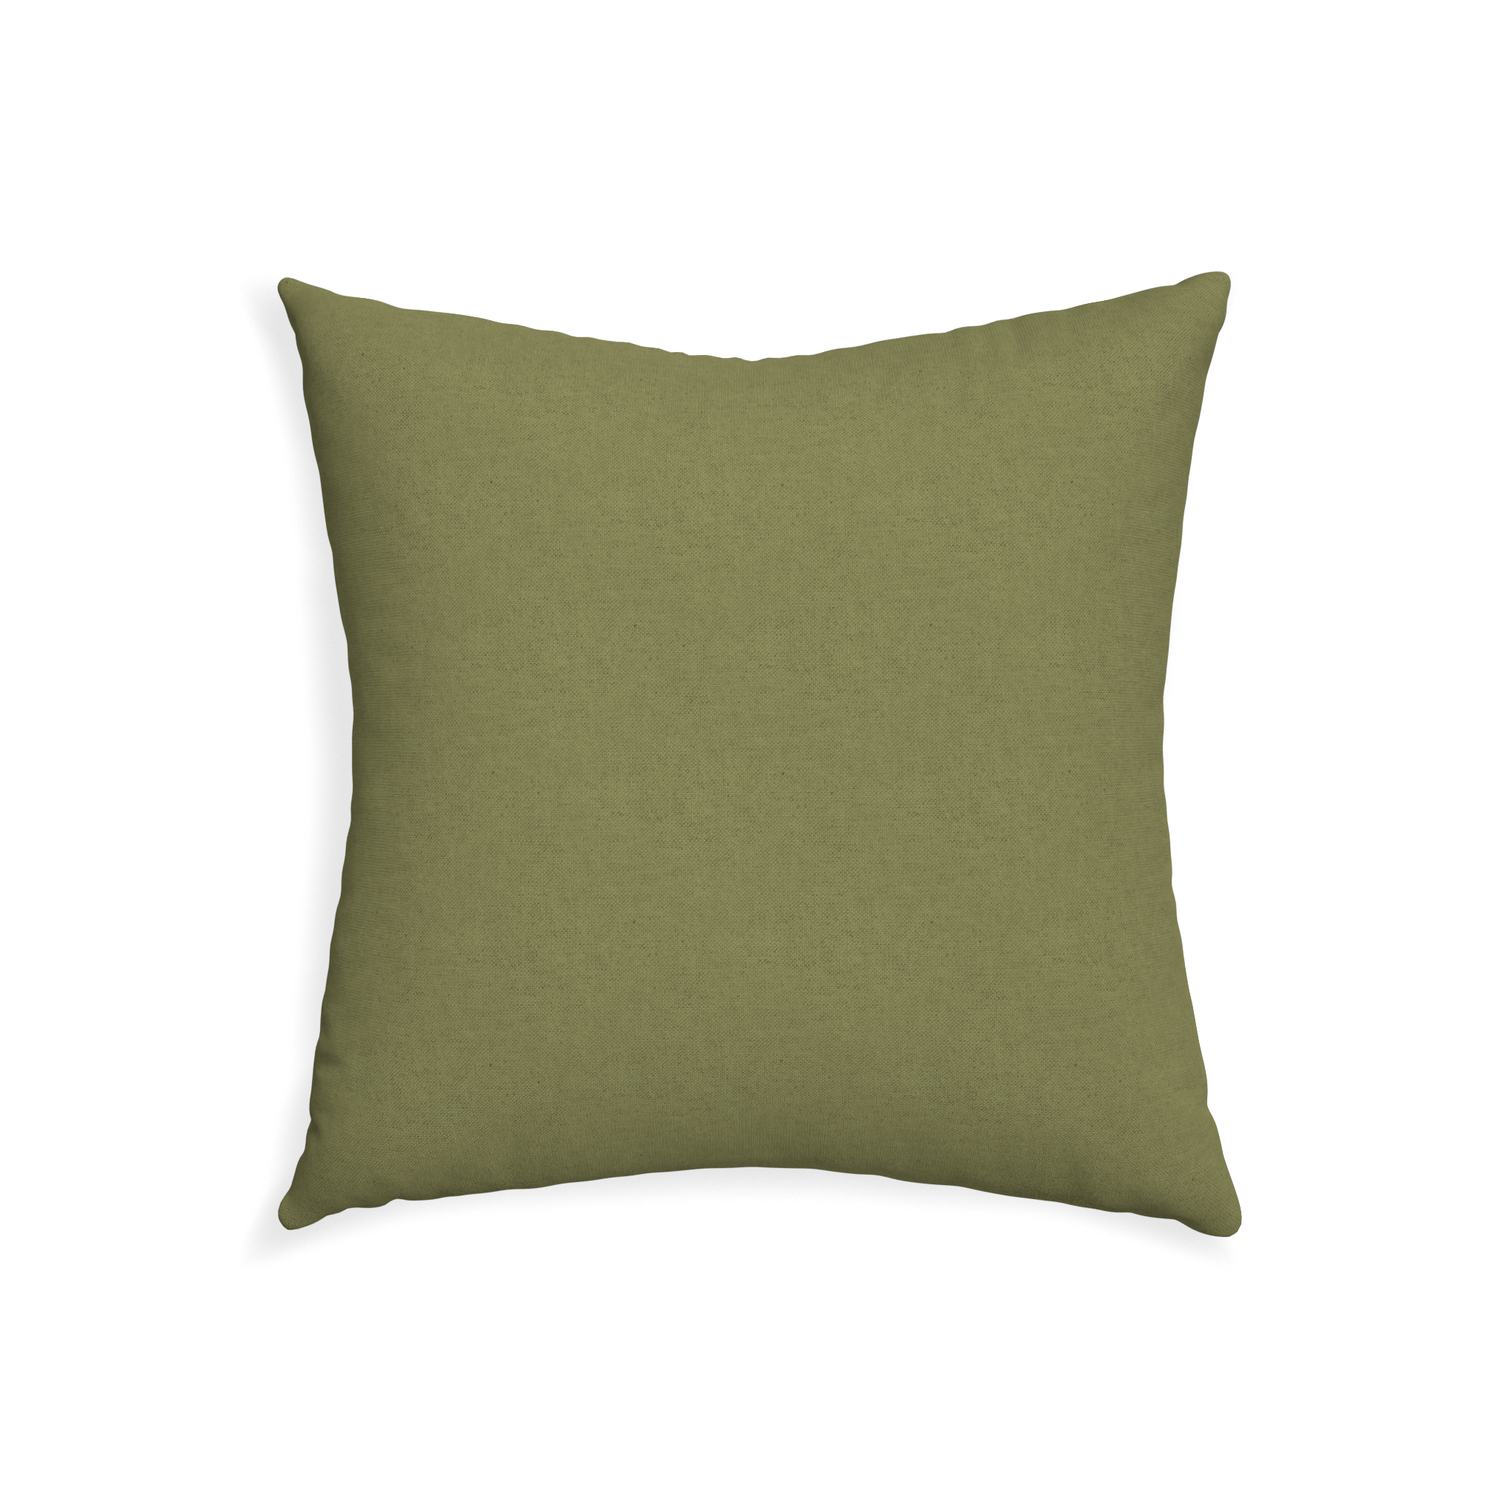 22-square moss custom moss greenpillow with none on white background